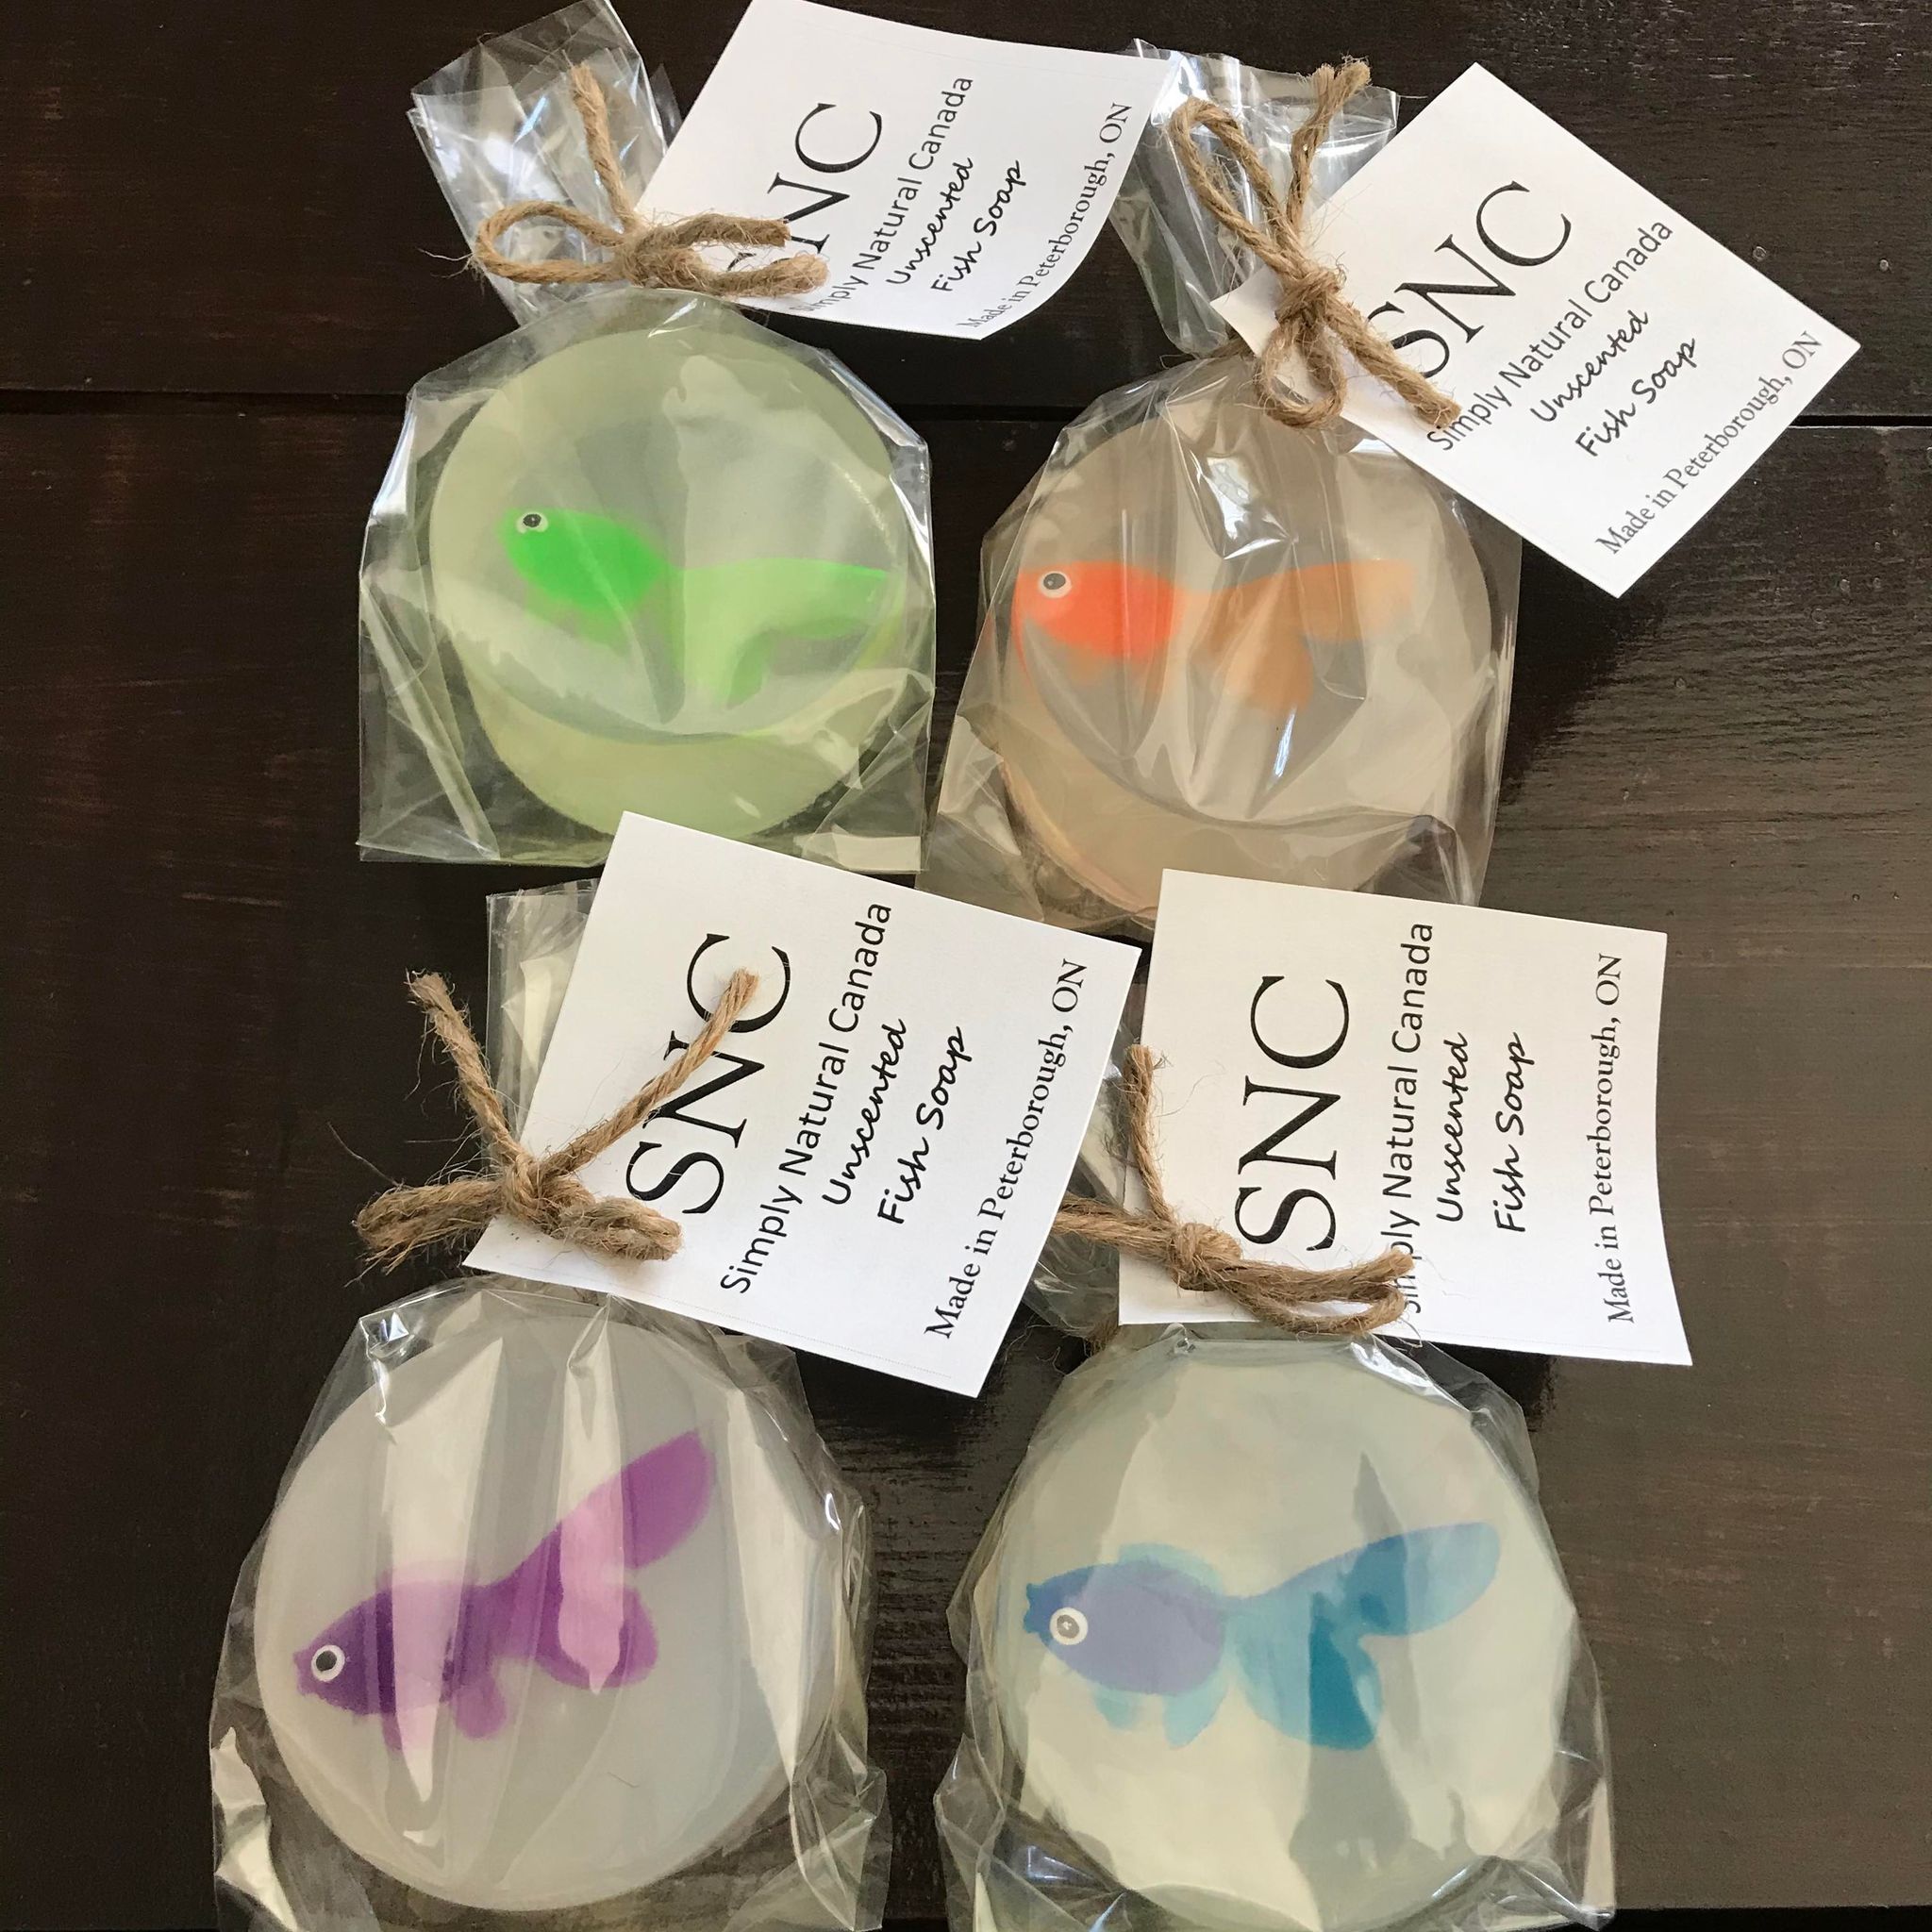 Limited edition simply natural canada round unscented vegetable glycern fish soap with a colorful vinyl fish inside packaged in a compostable bag and sold individually with either a green, orange, purple or blue fish